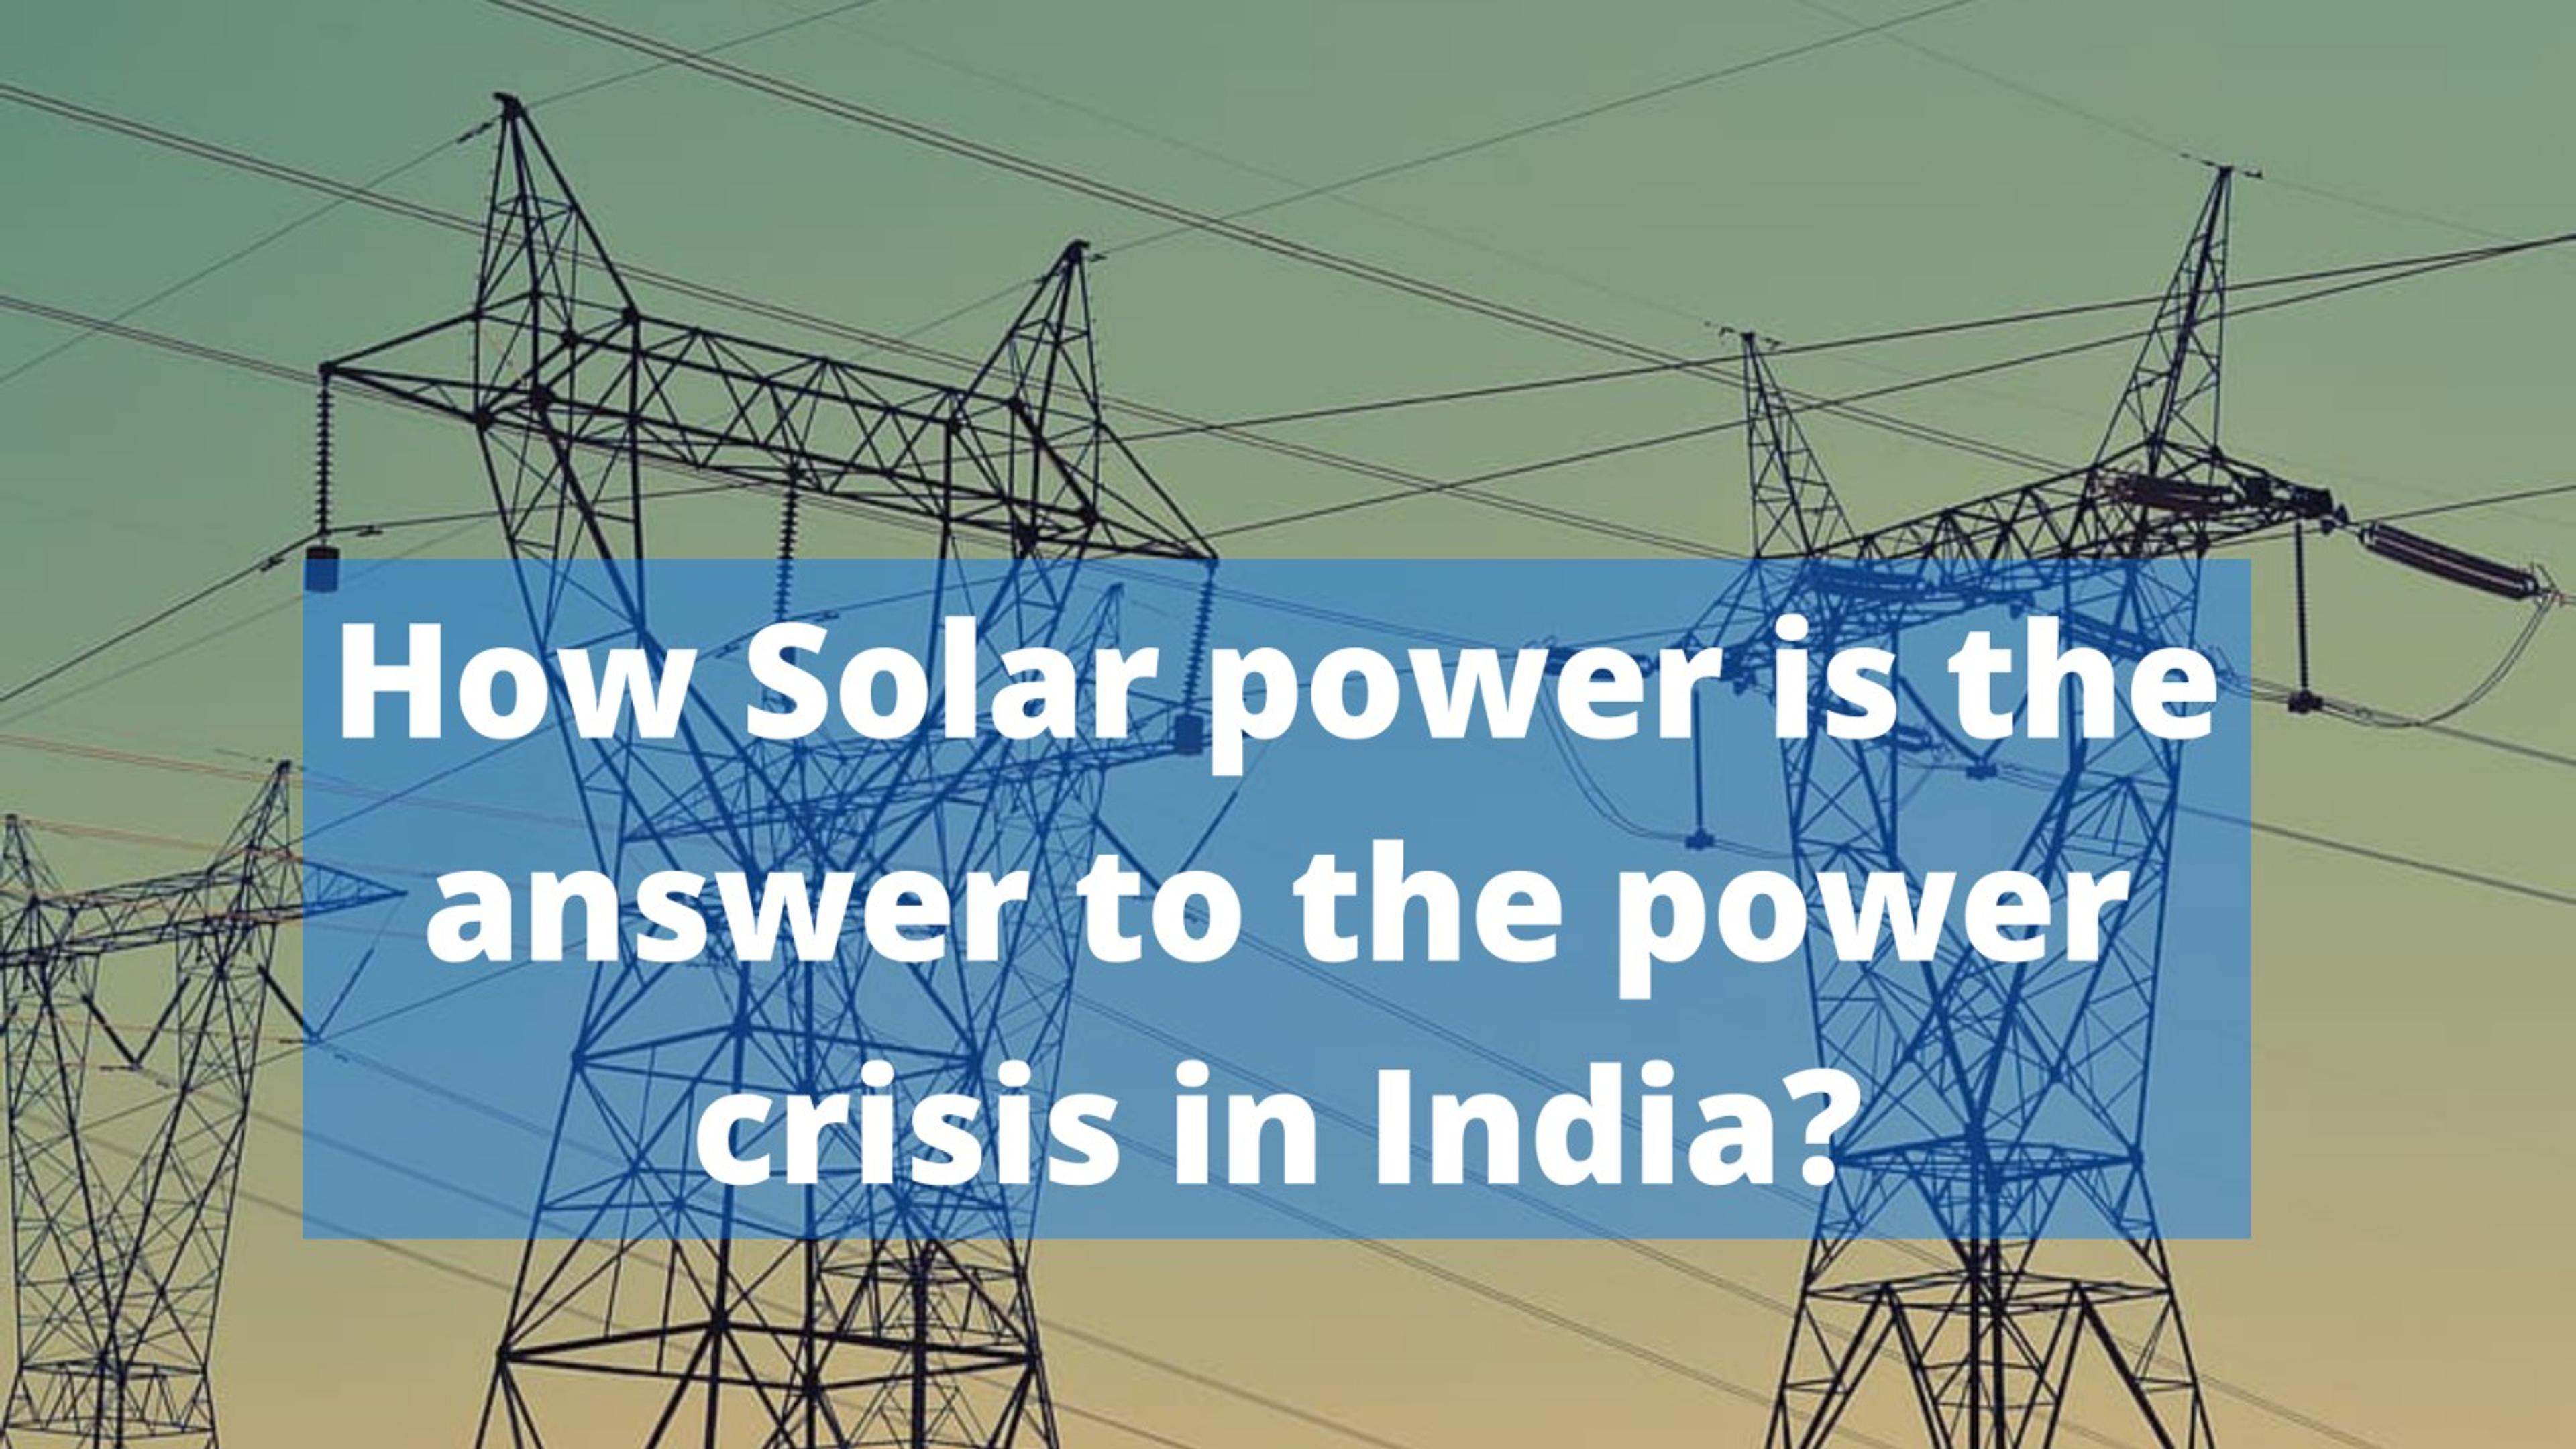 Solar power is the answer to power crisis.